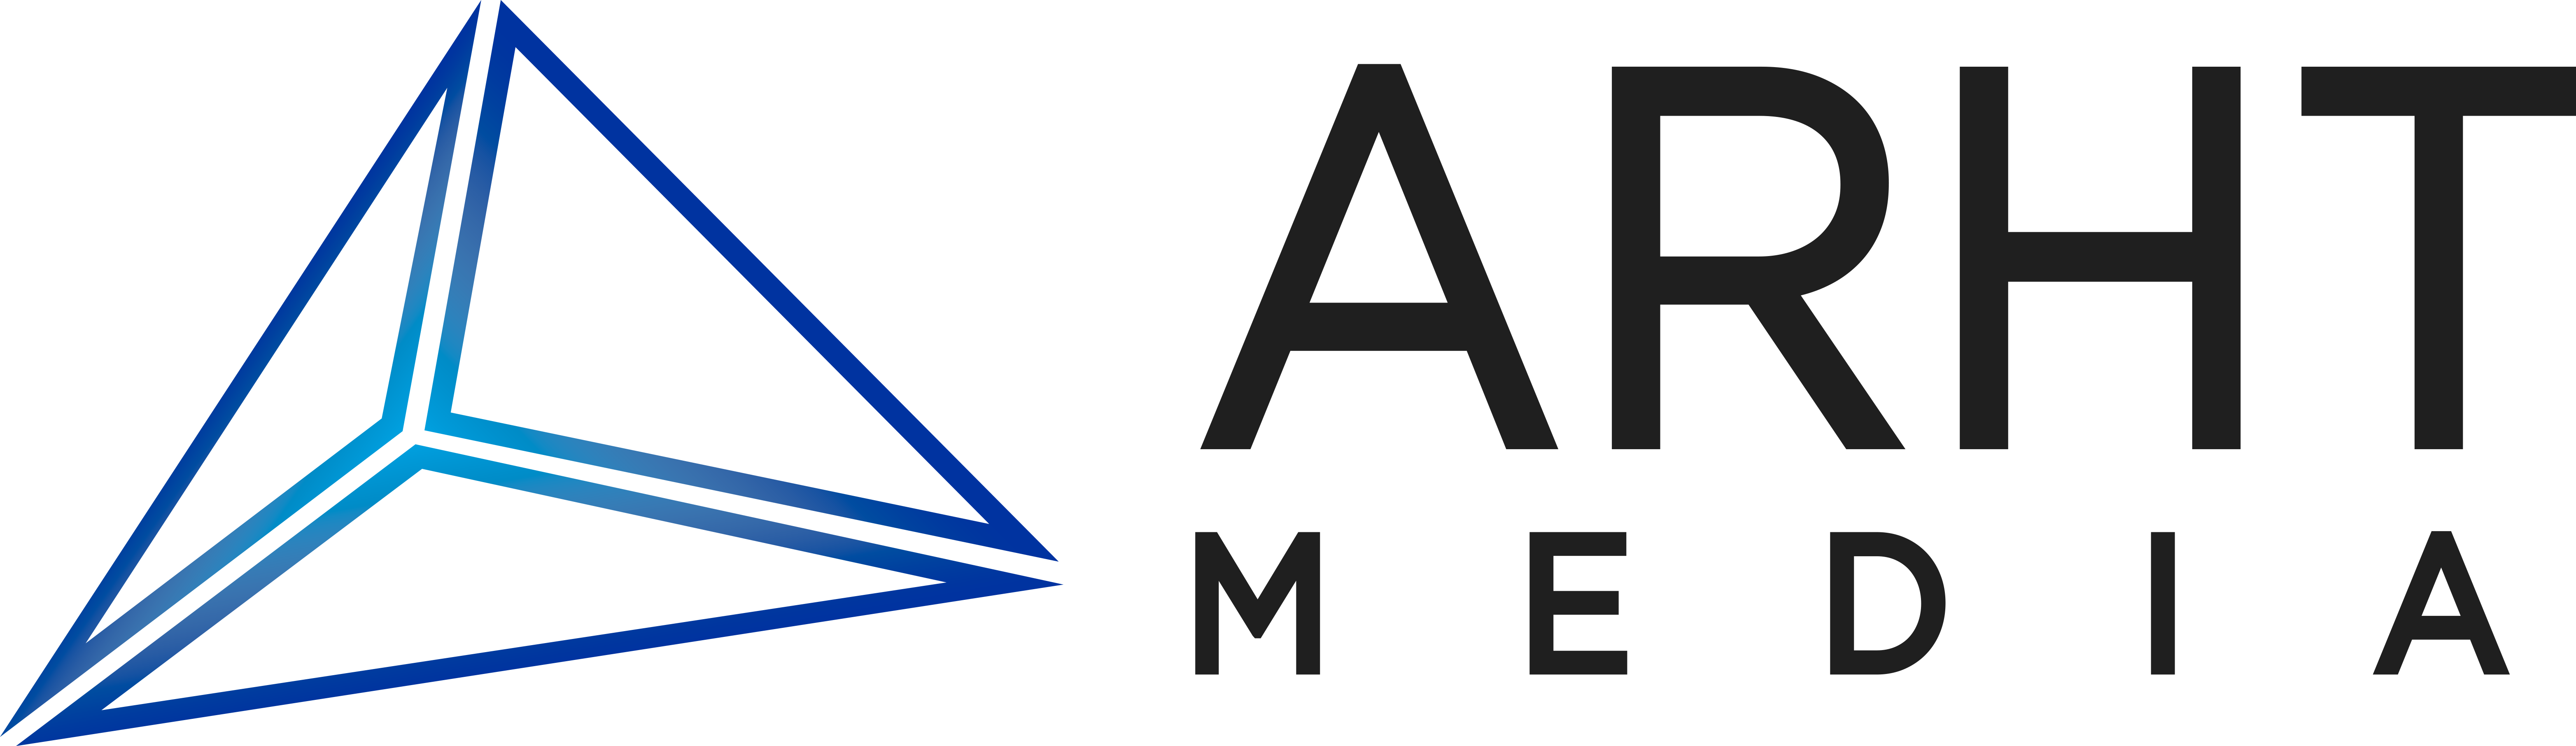 ARHT Media Announces New Strategic Partnership With Liaison Technology Group Including A Permanent Capture and Demo Studio In The Chicago Area